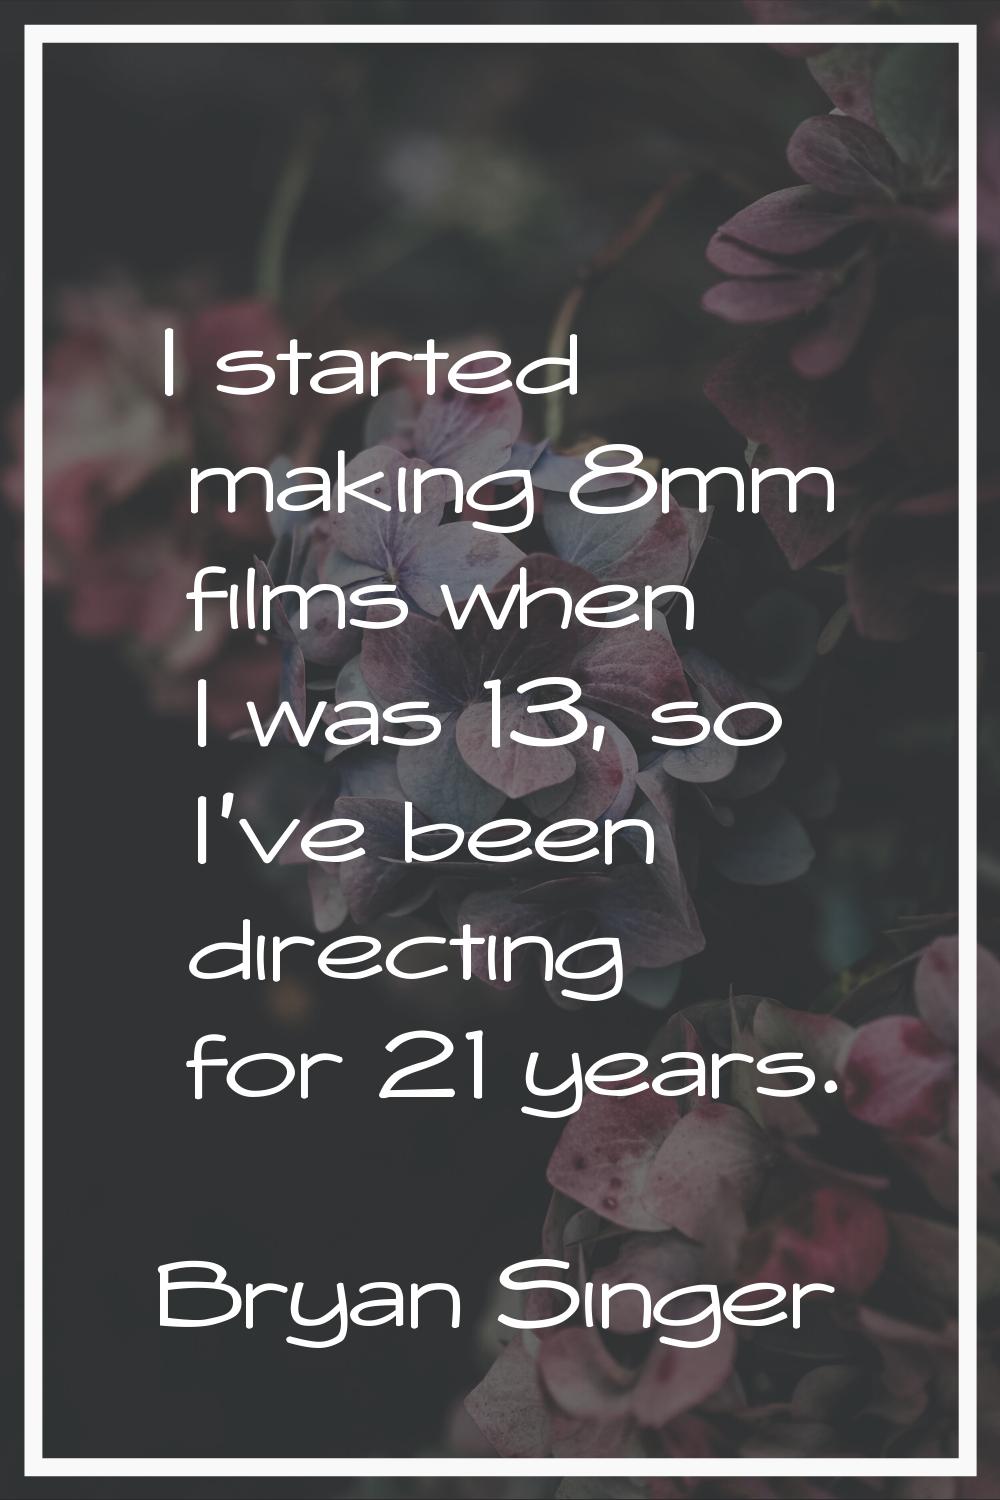 I started making 8mm films when I was 13, so I've been directing for 21 years.